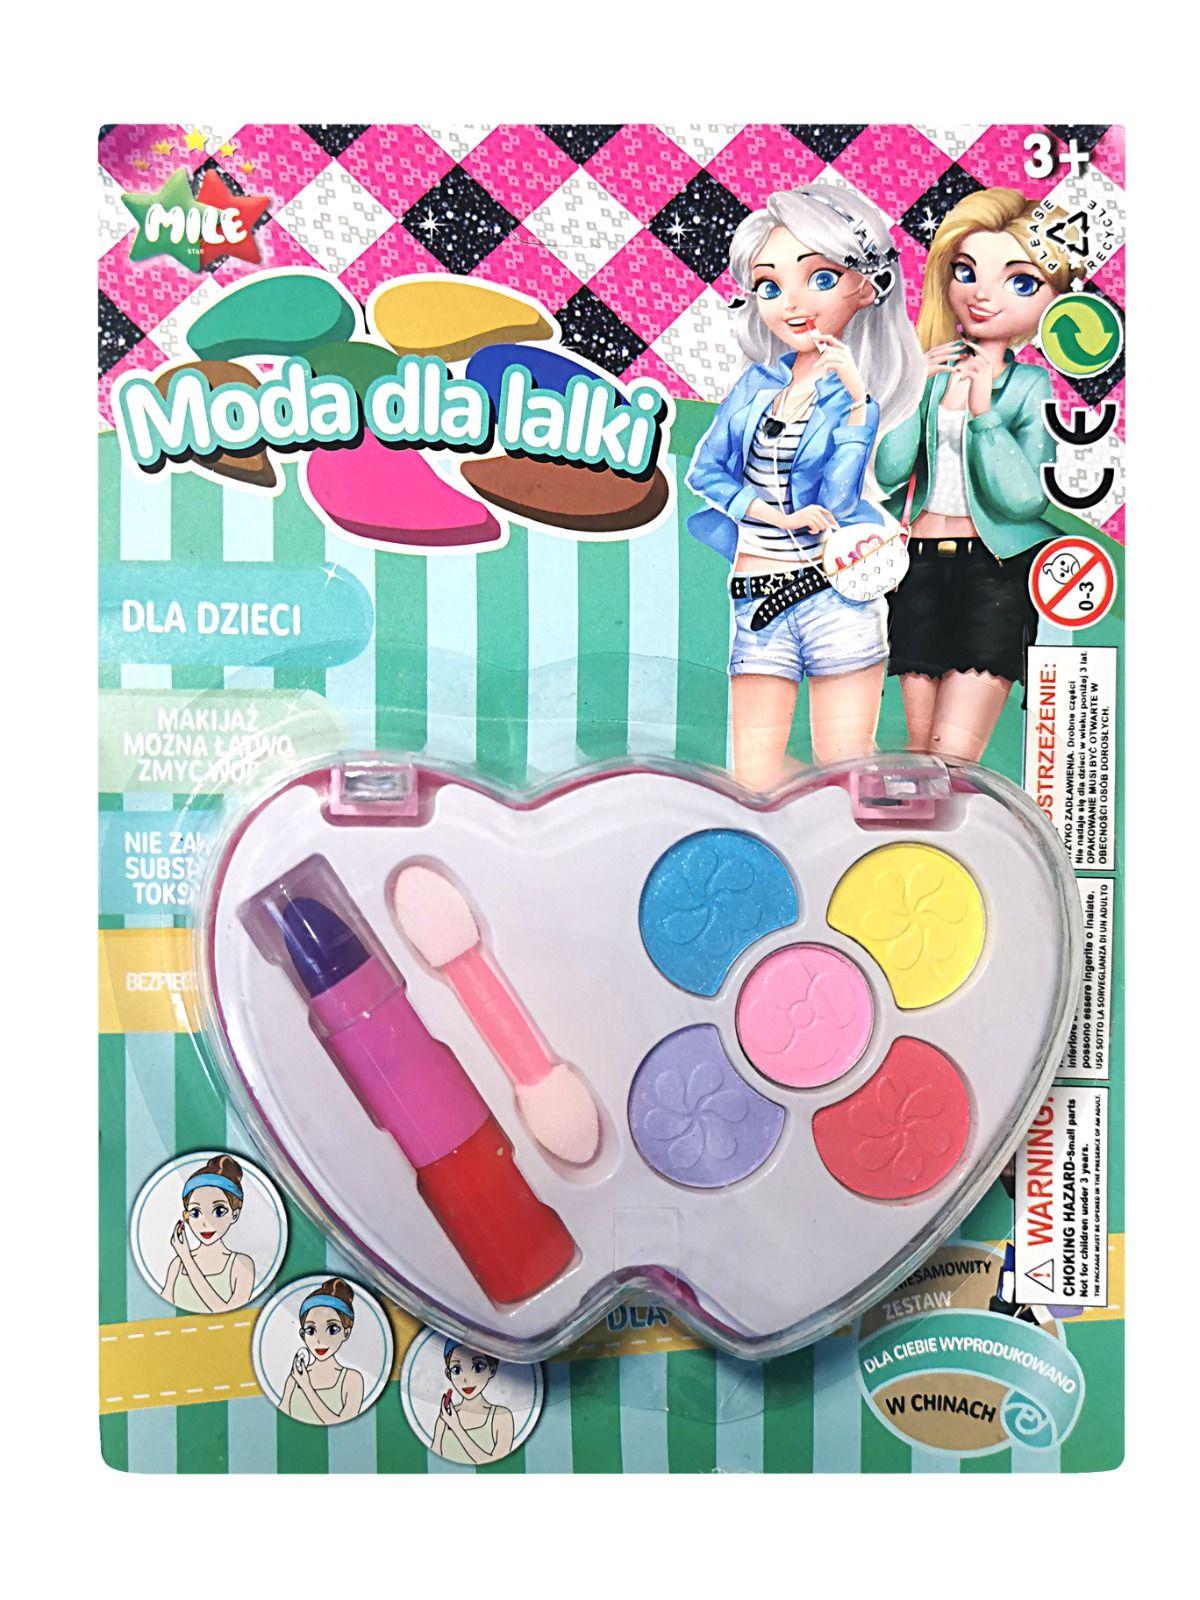 A set of makeup cosmetics for a girl, type II